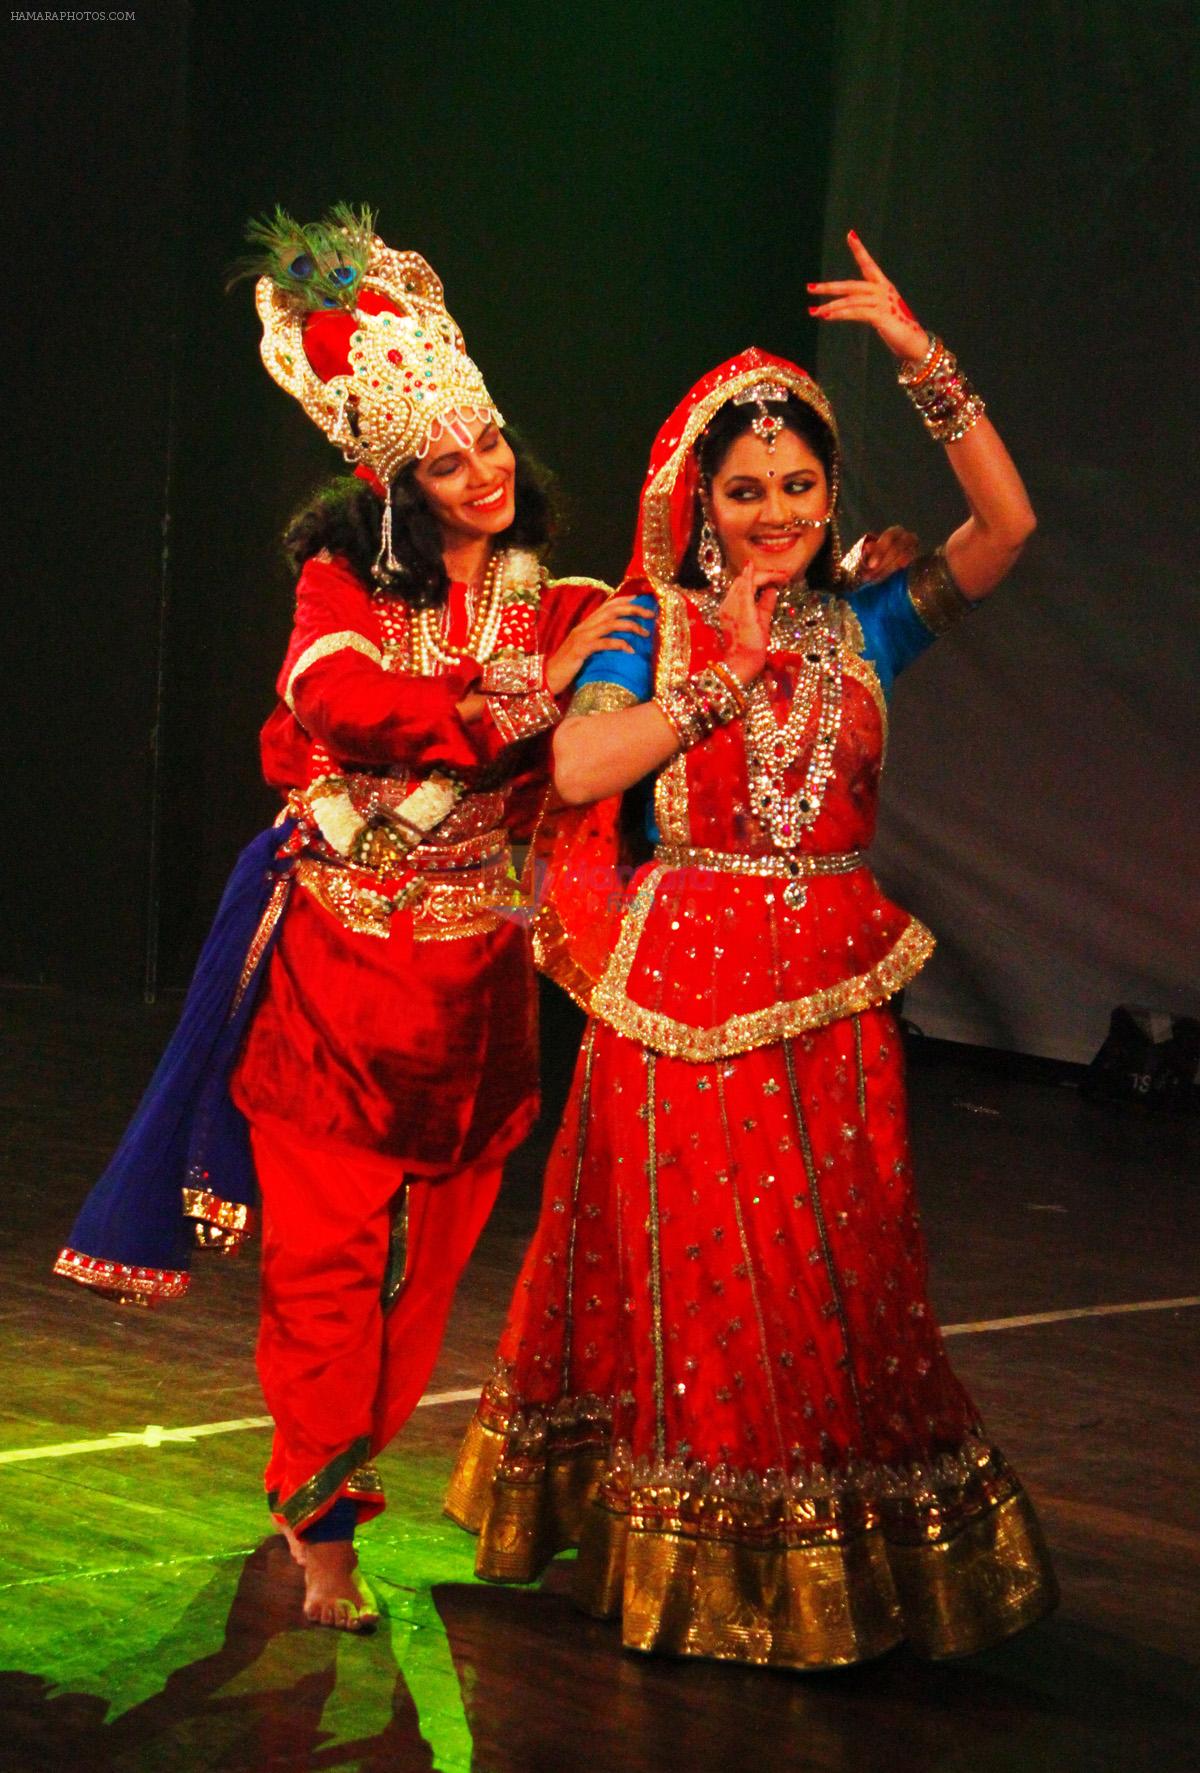 Gracy Singh performs for the cause of global warming at an event organized by the Brahmakumari Centre & Jain Jagruti Centre 1